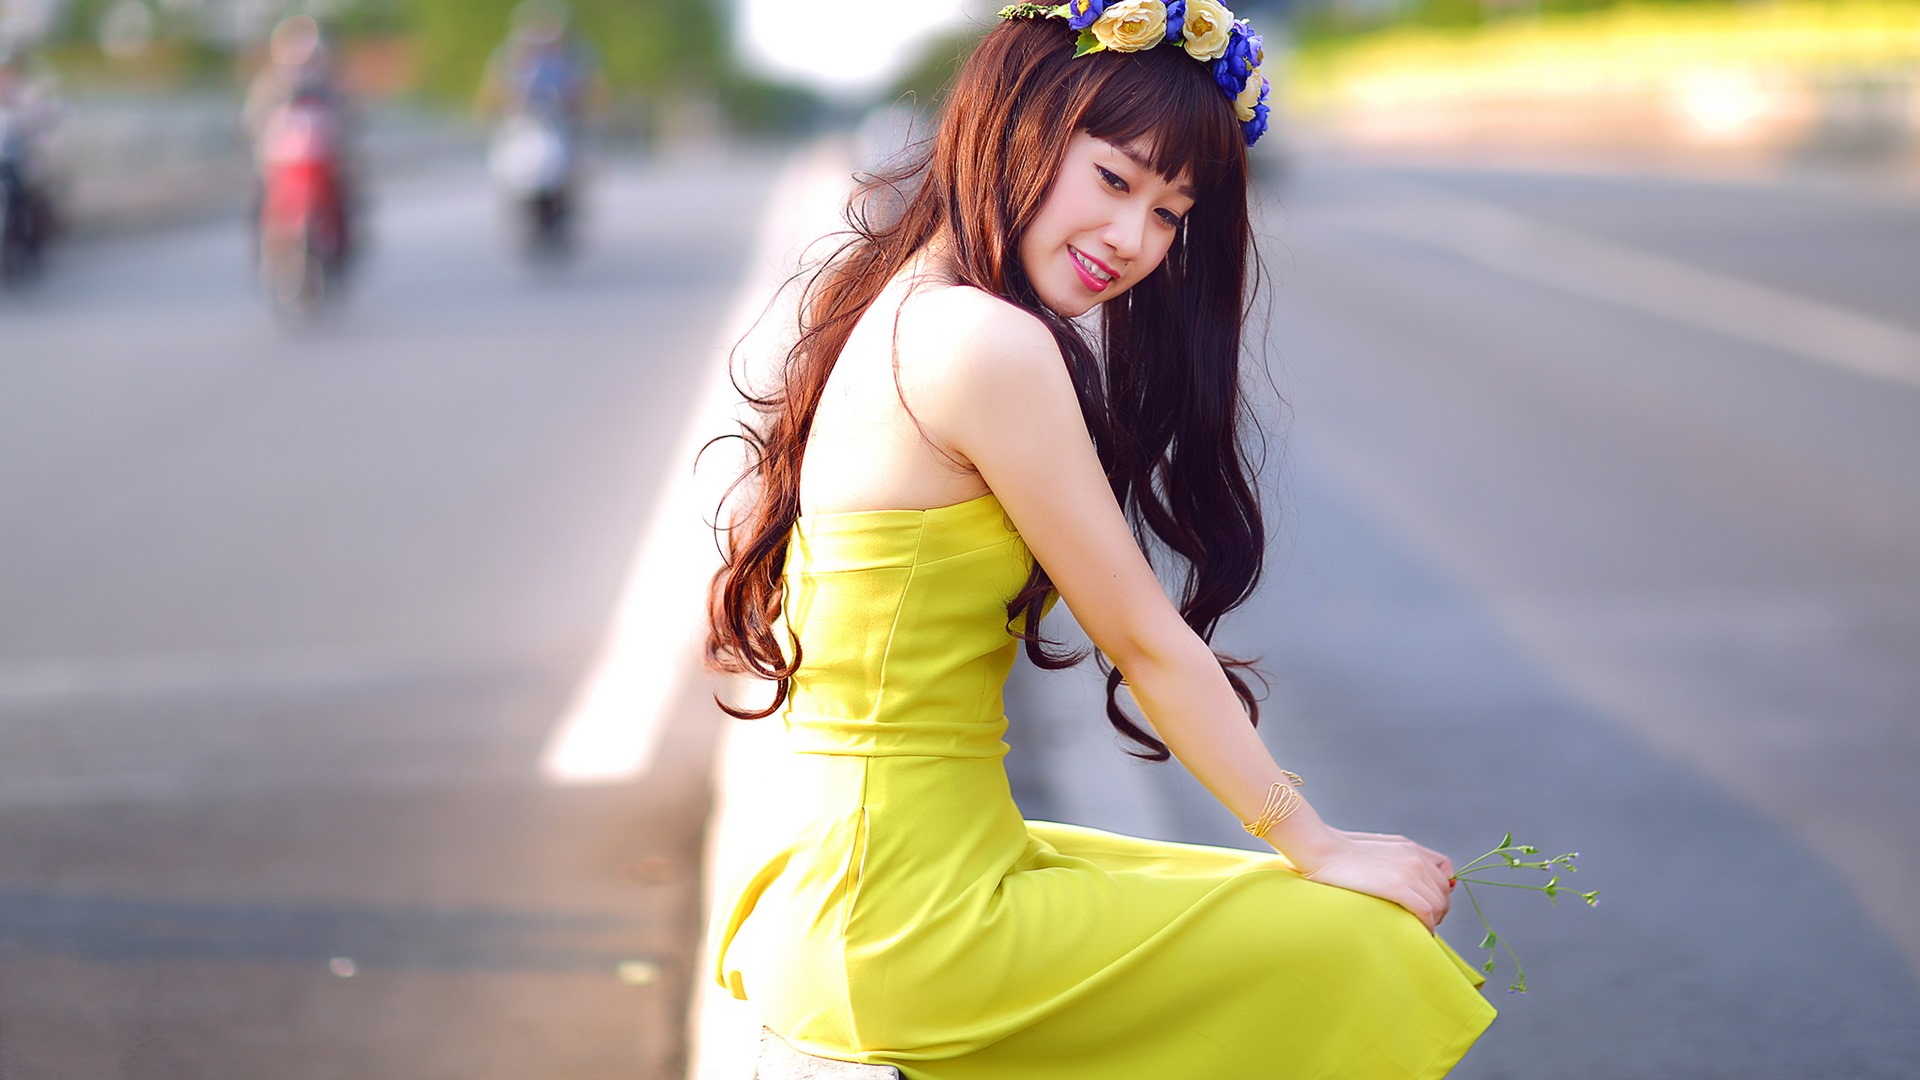 Pure and lovely young Asian girl HD wallpapers collection (2) #27 - 1920x1080